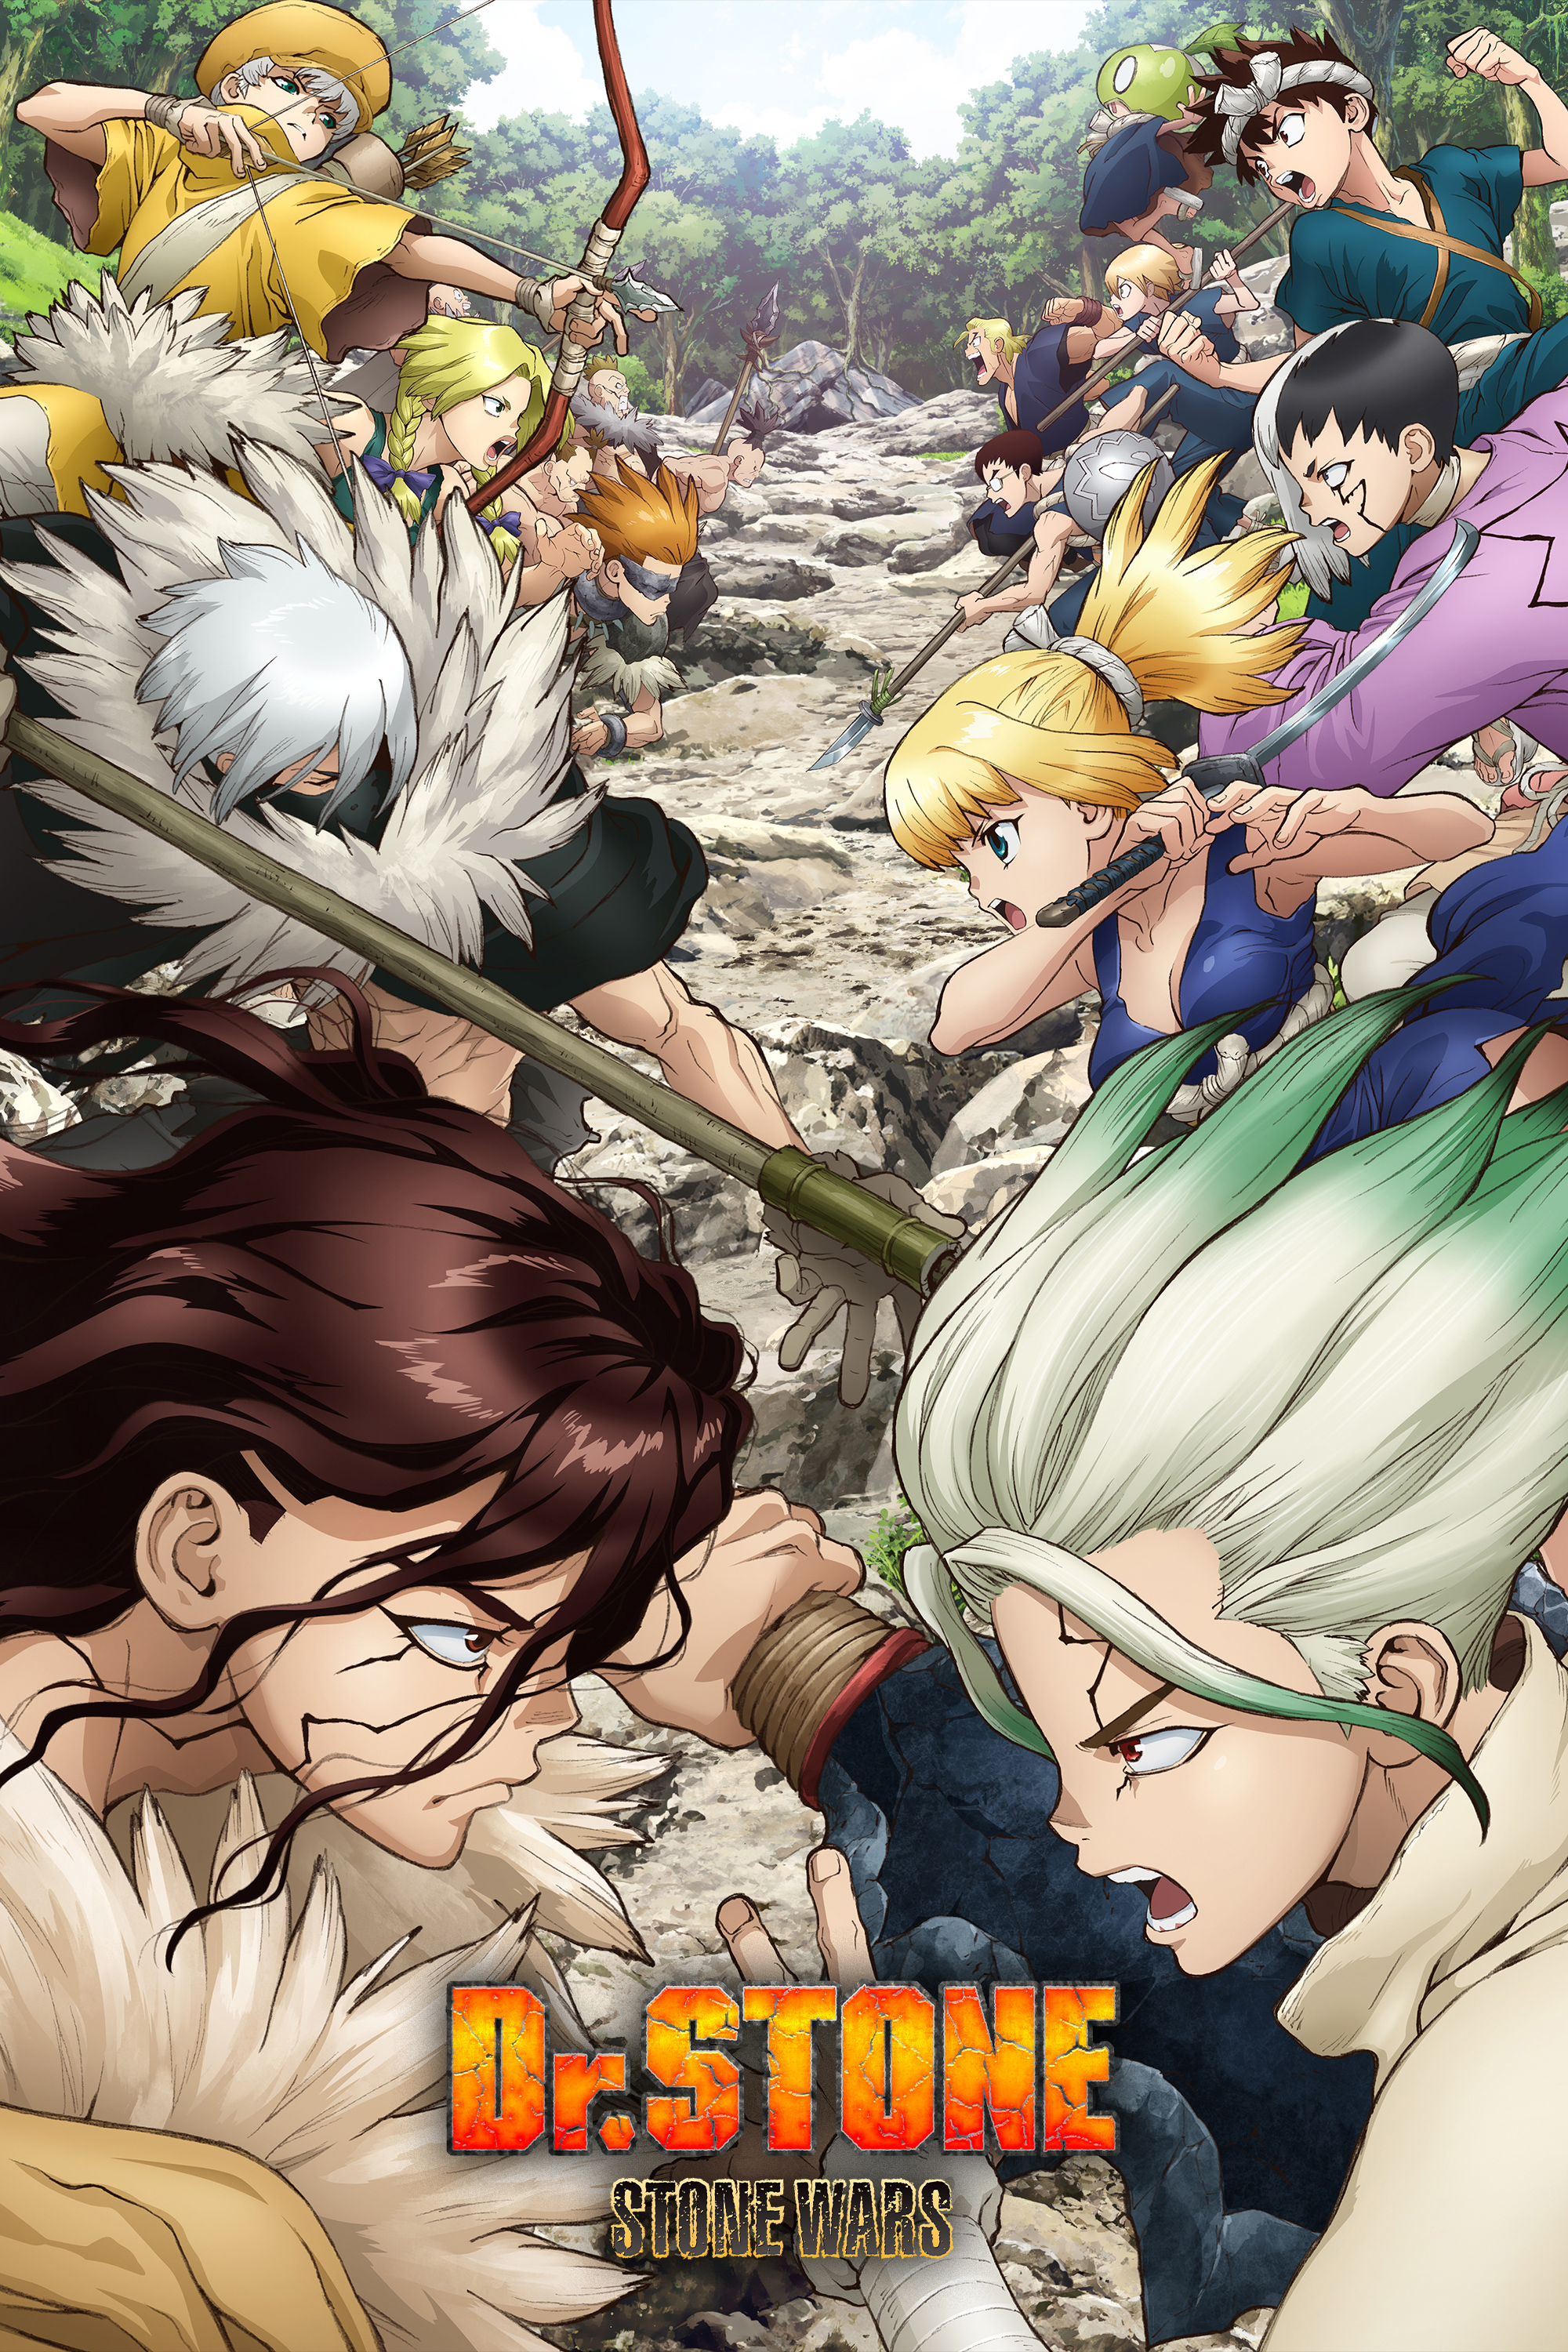 Dr. STONE | Watch on Funimation